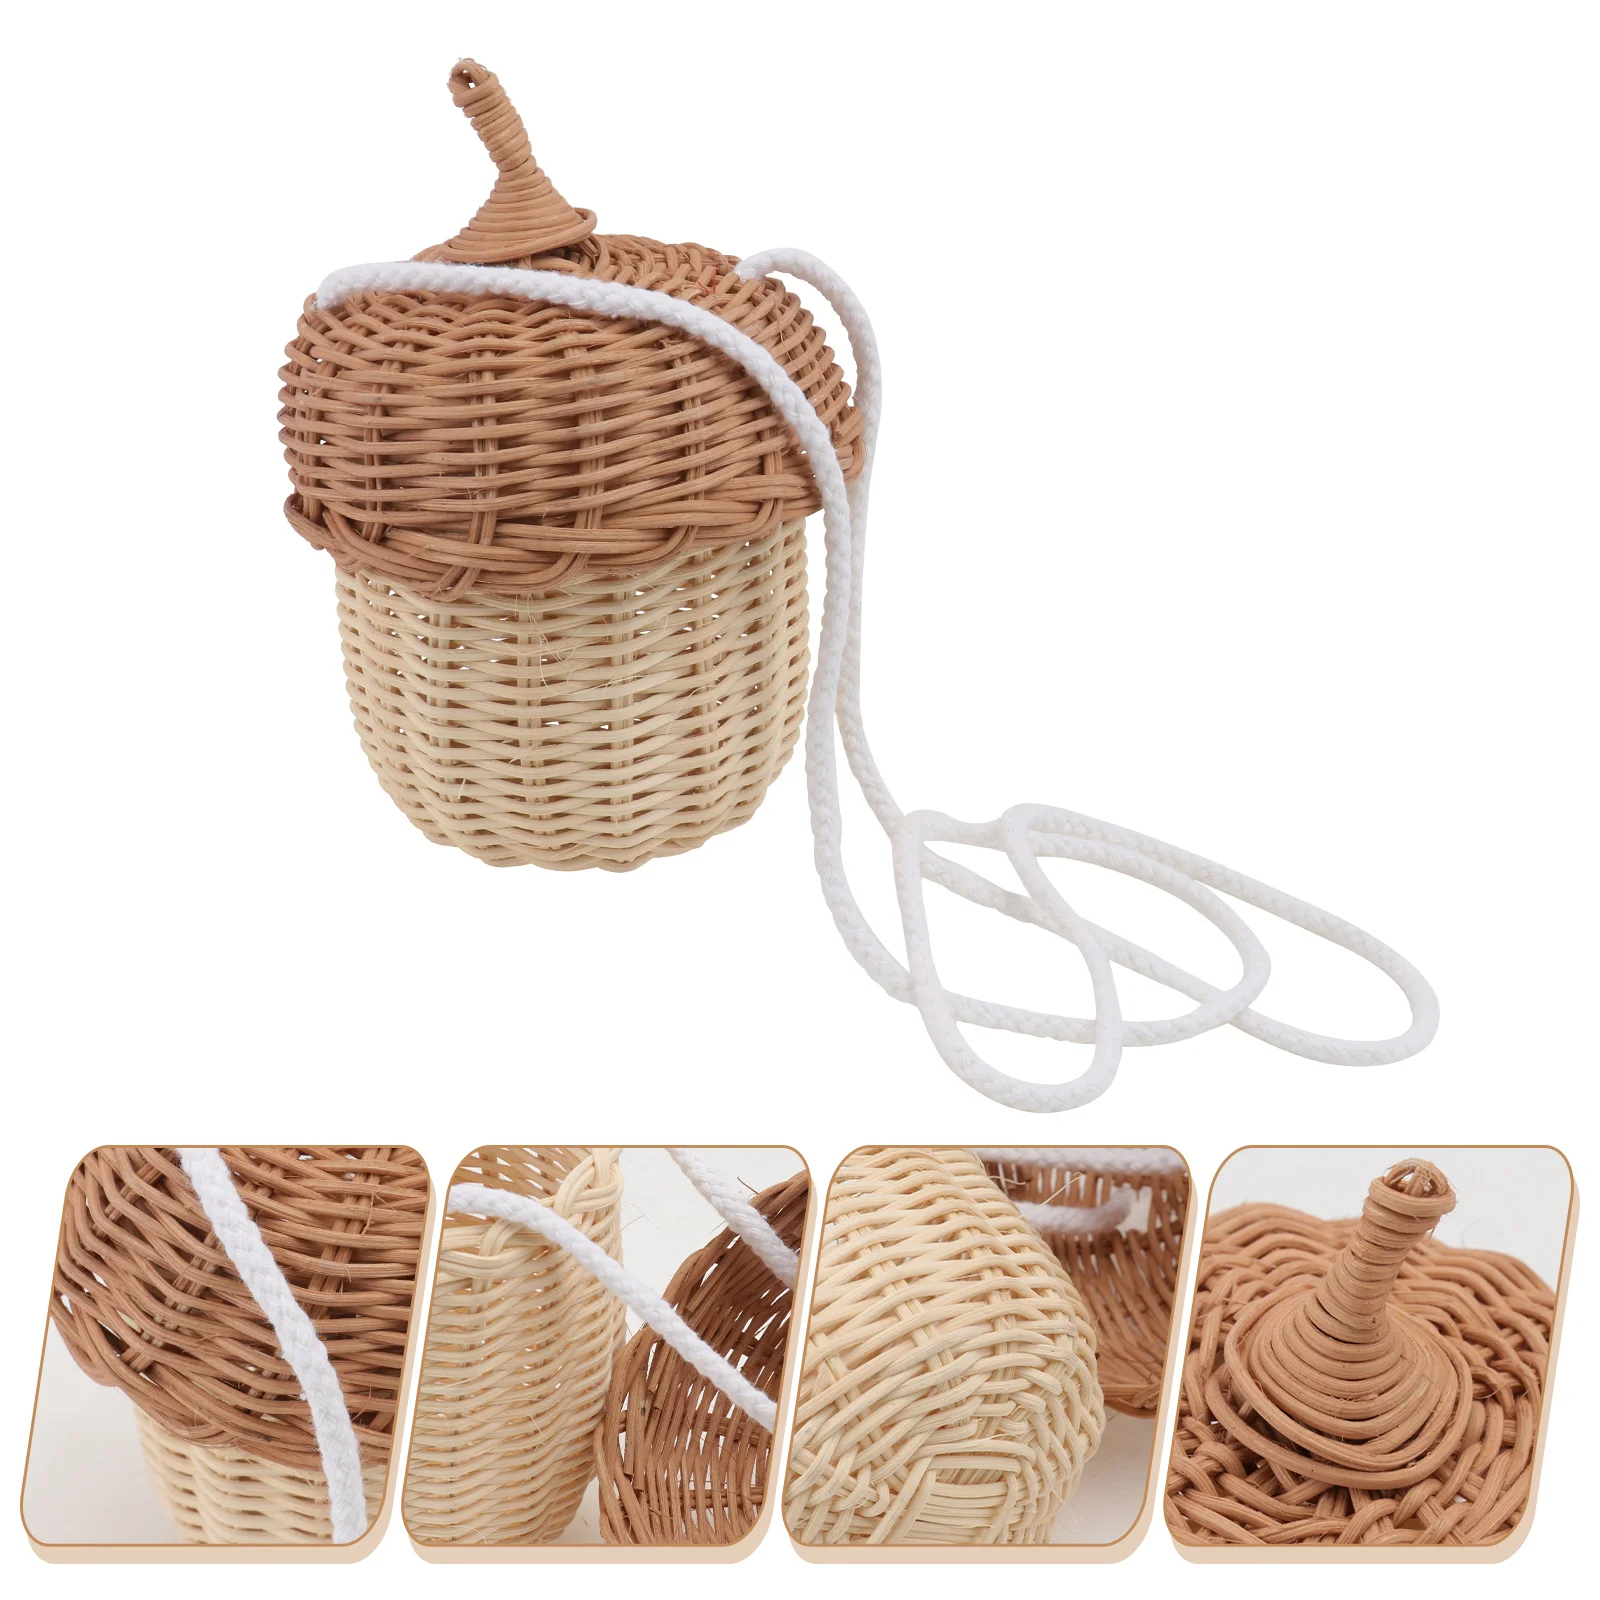 

Pine Cone Satchel Children Photography Props Straw Beach Tote Wicker Rattan Basket Shaped Bag Indonesian Pouch Baby